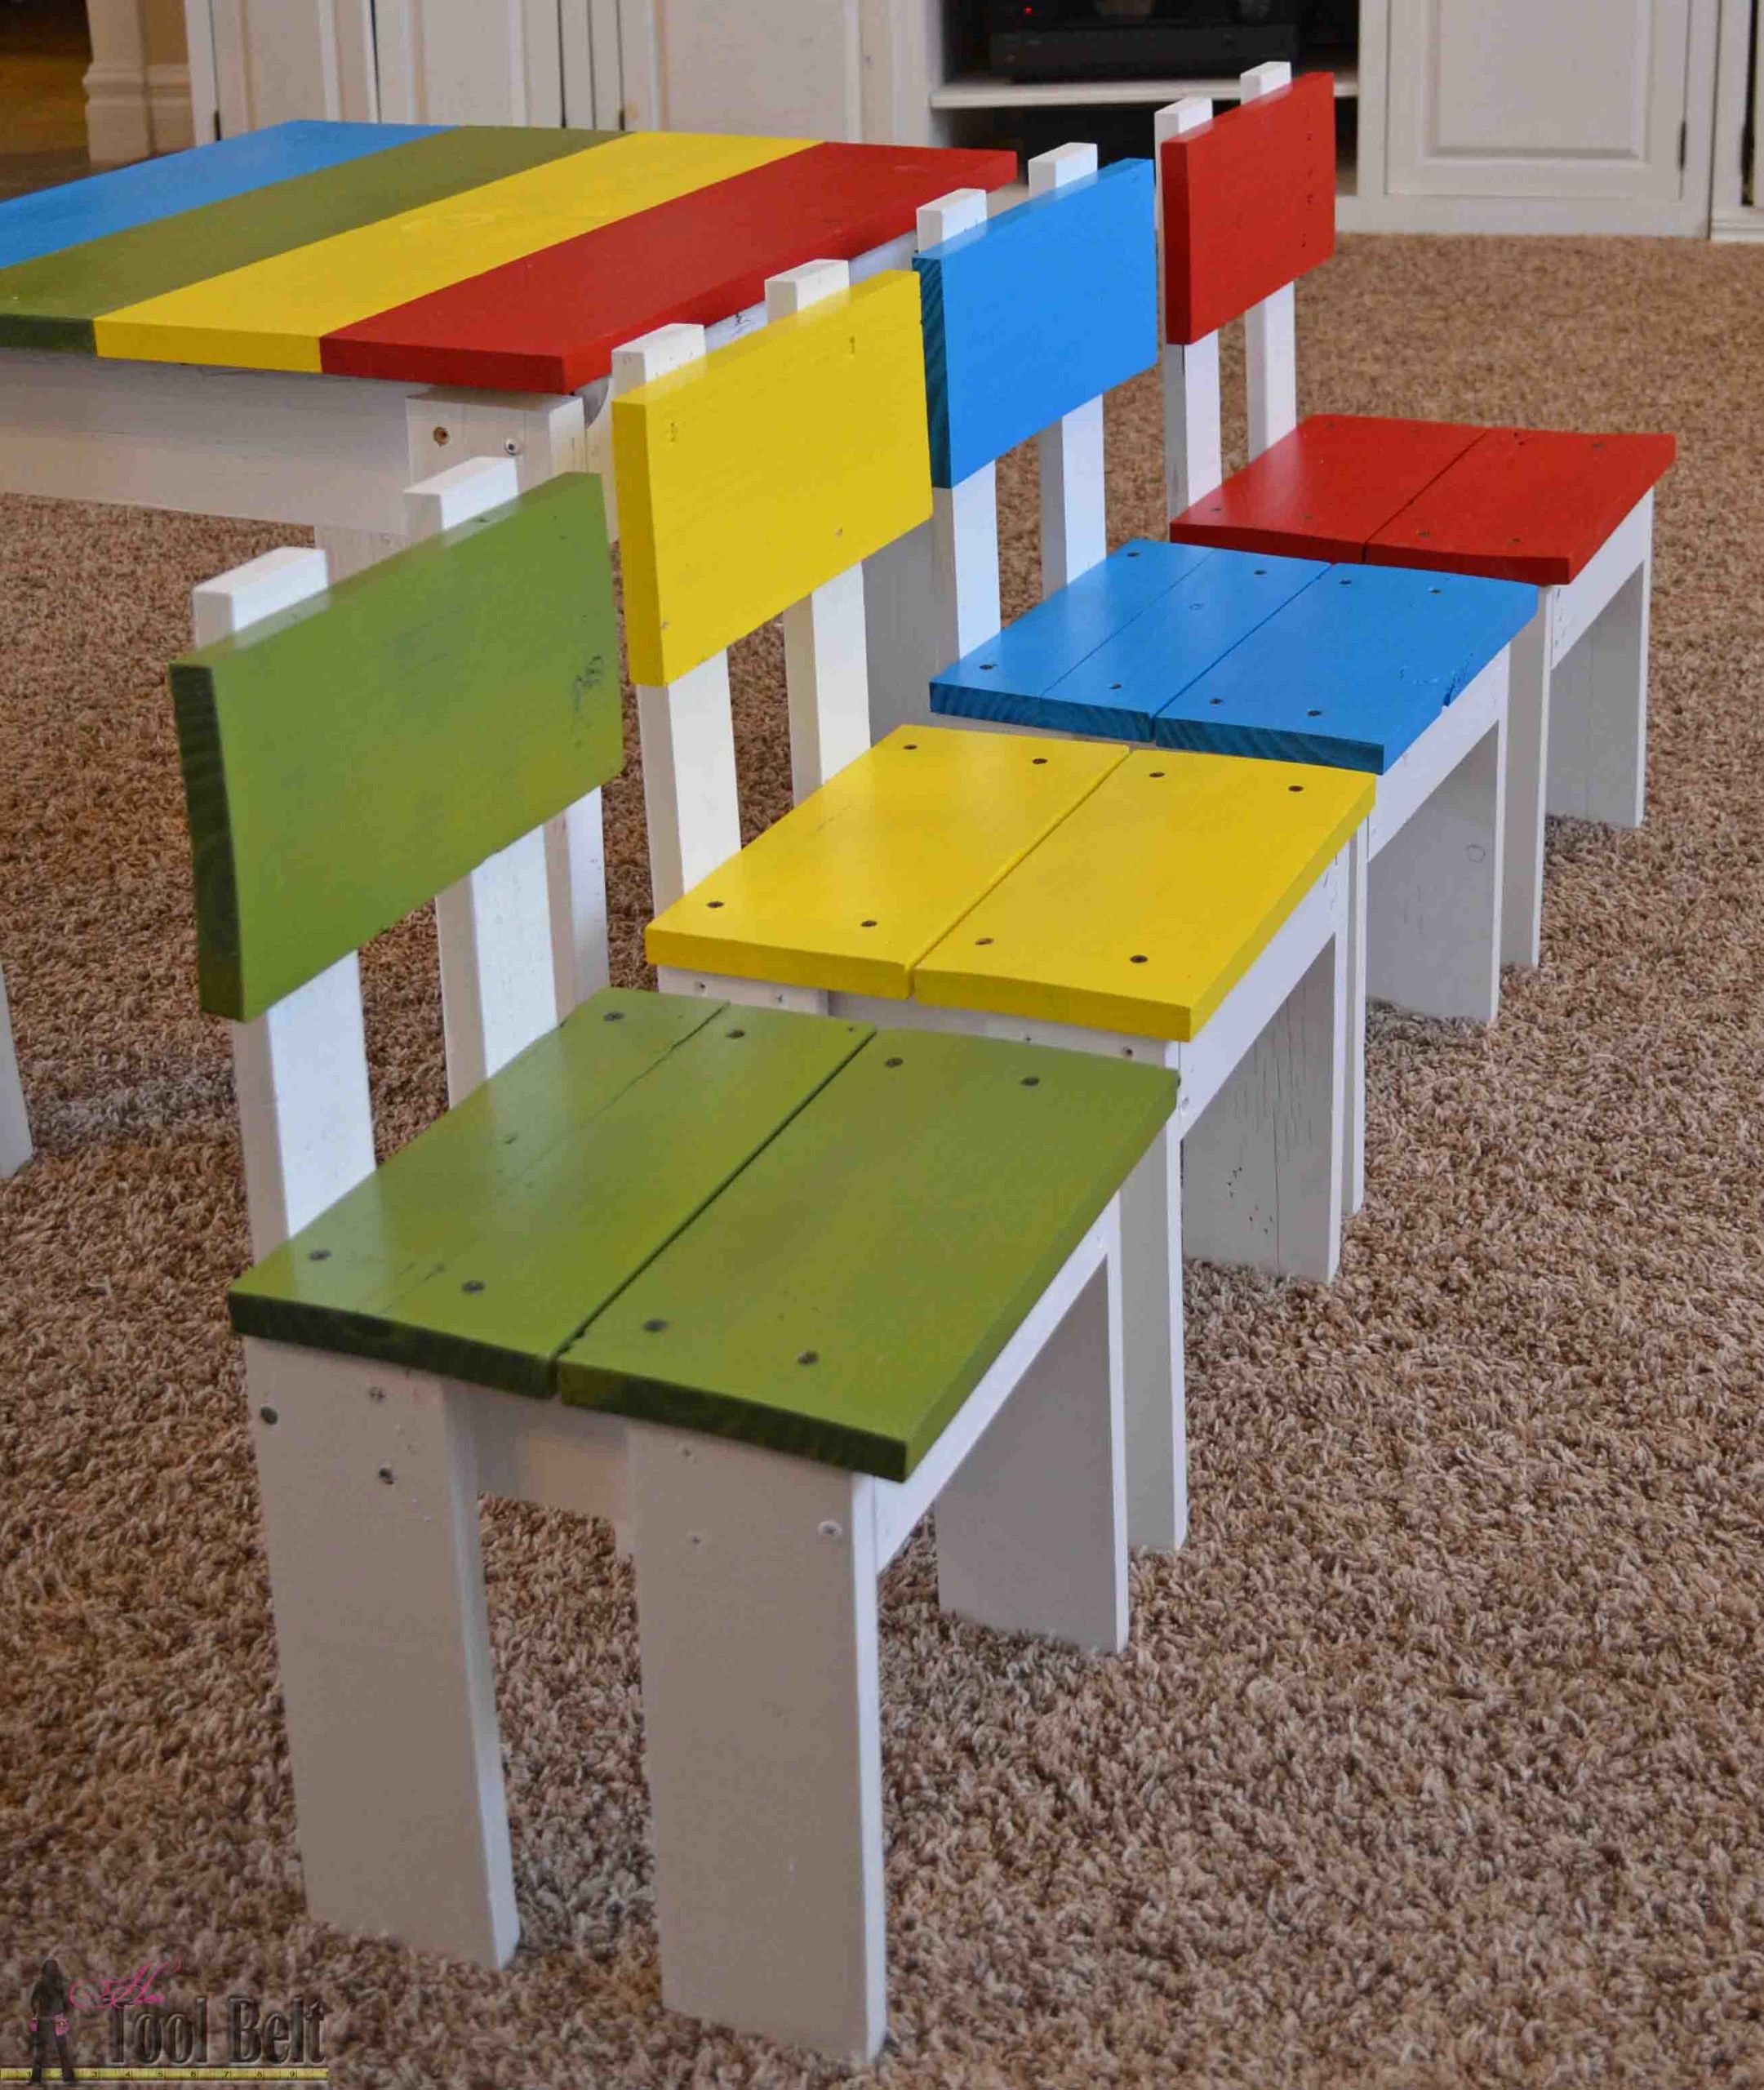 Diy Kids Table
 Simple Kid s Table and Chair Set Her Tool Belt